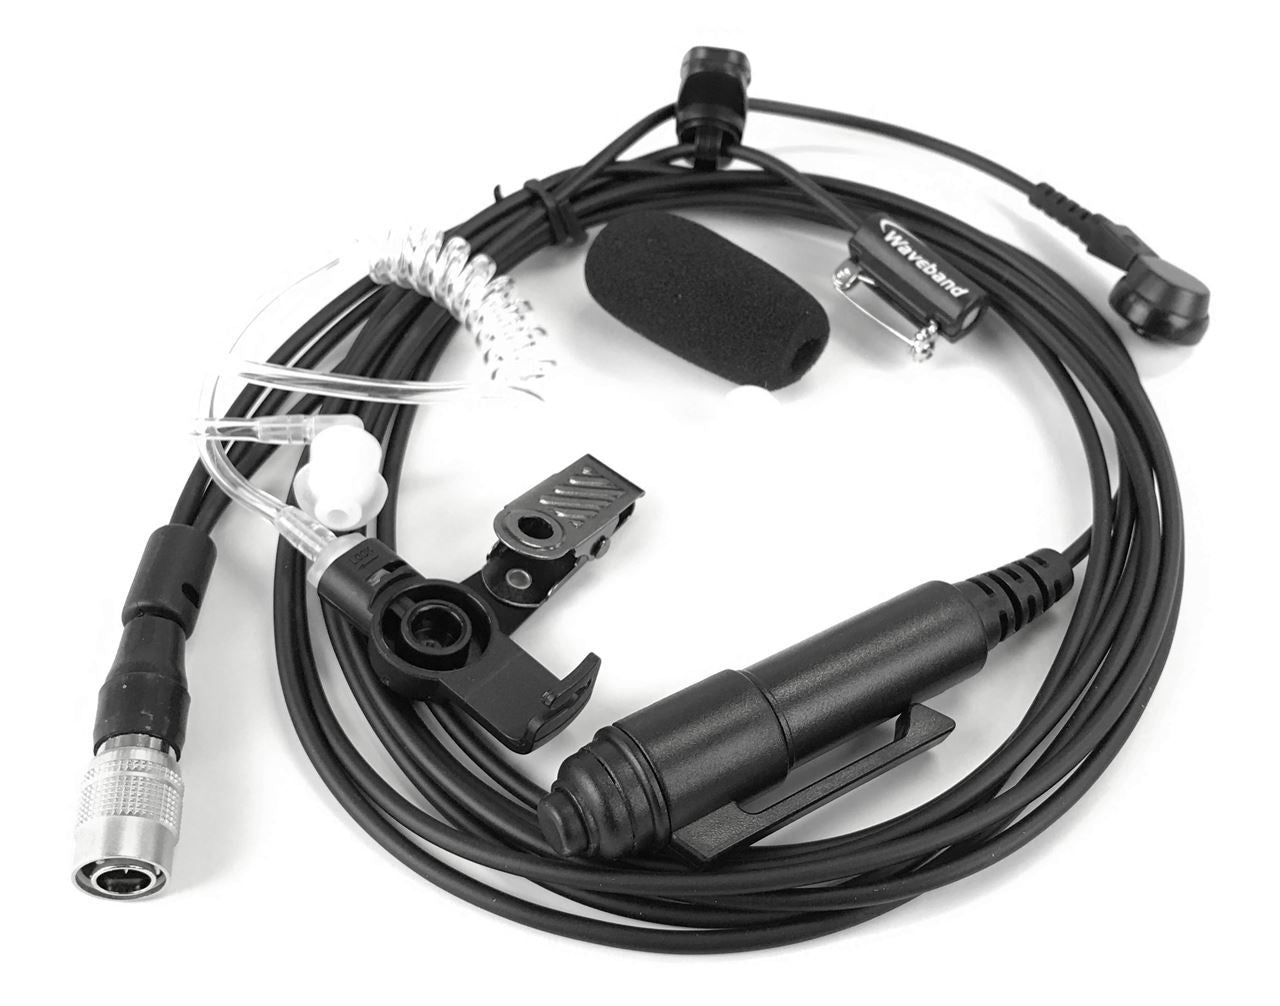 Comparable KHS-12 3 wire mini lapel mic with earphone for use with the Kenwood NX-410 Portable Radio. - Waveband Communications